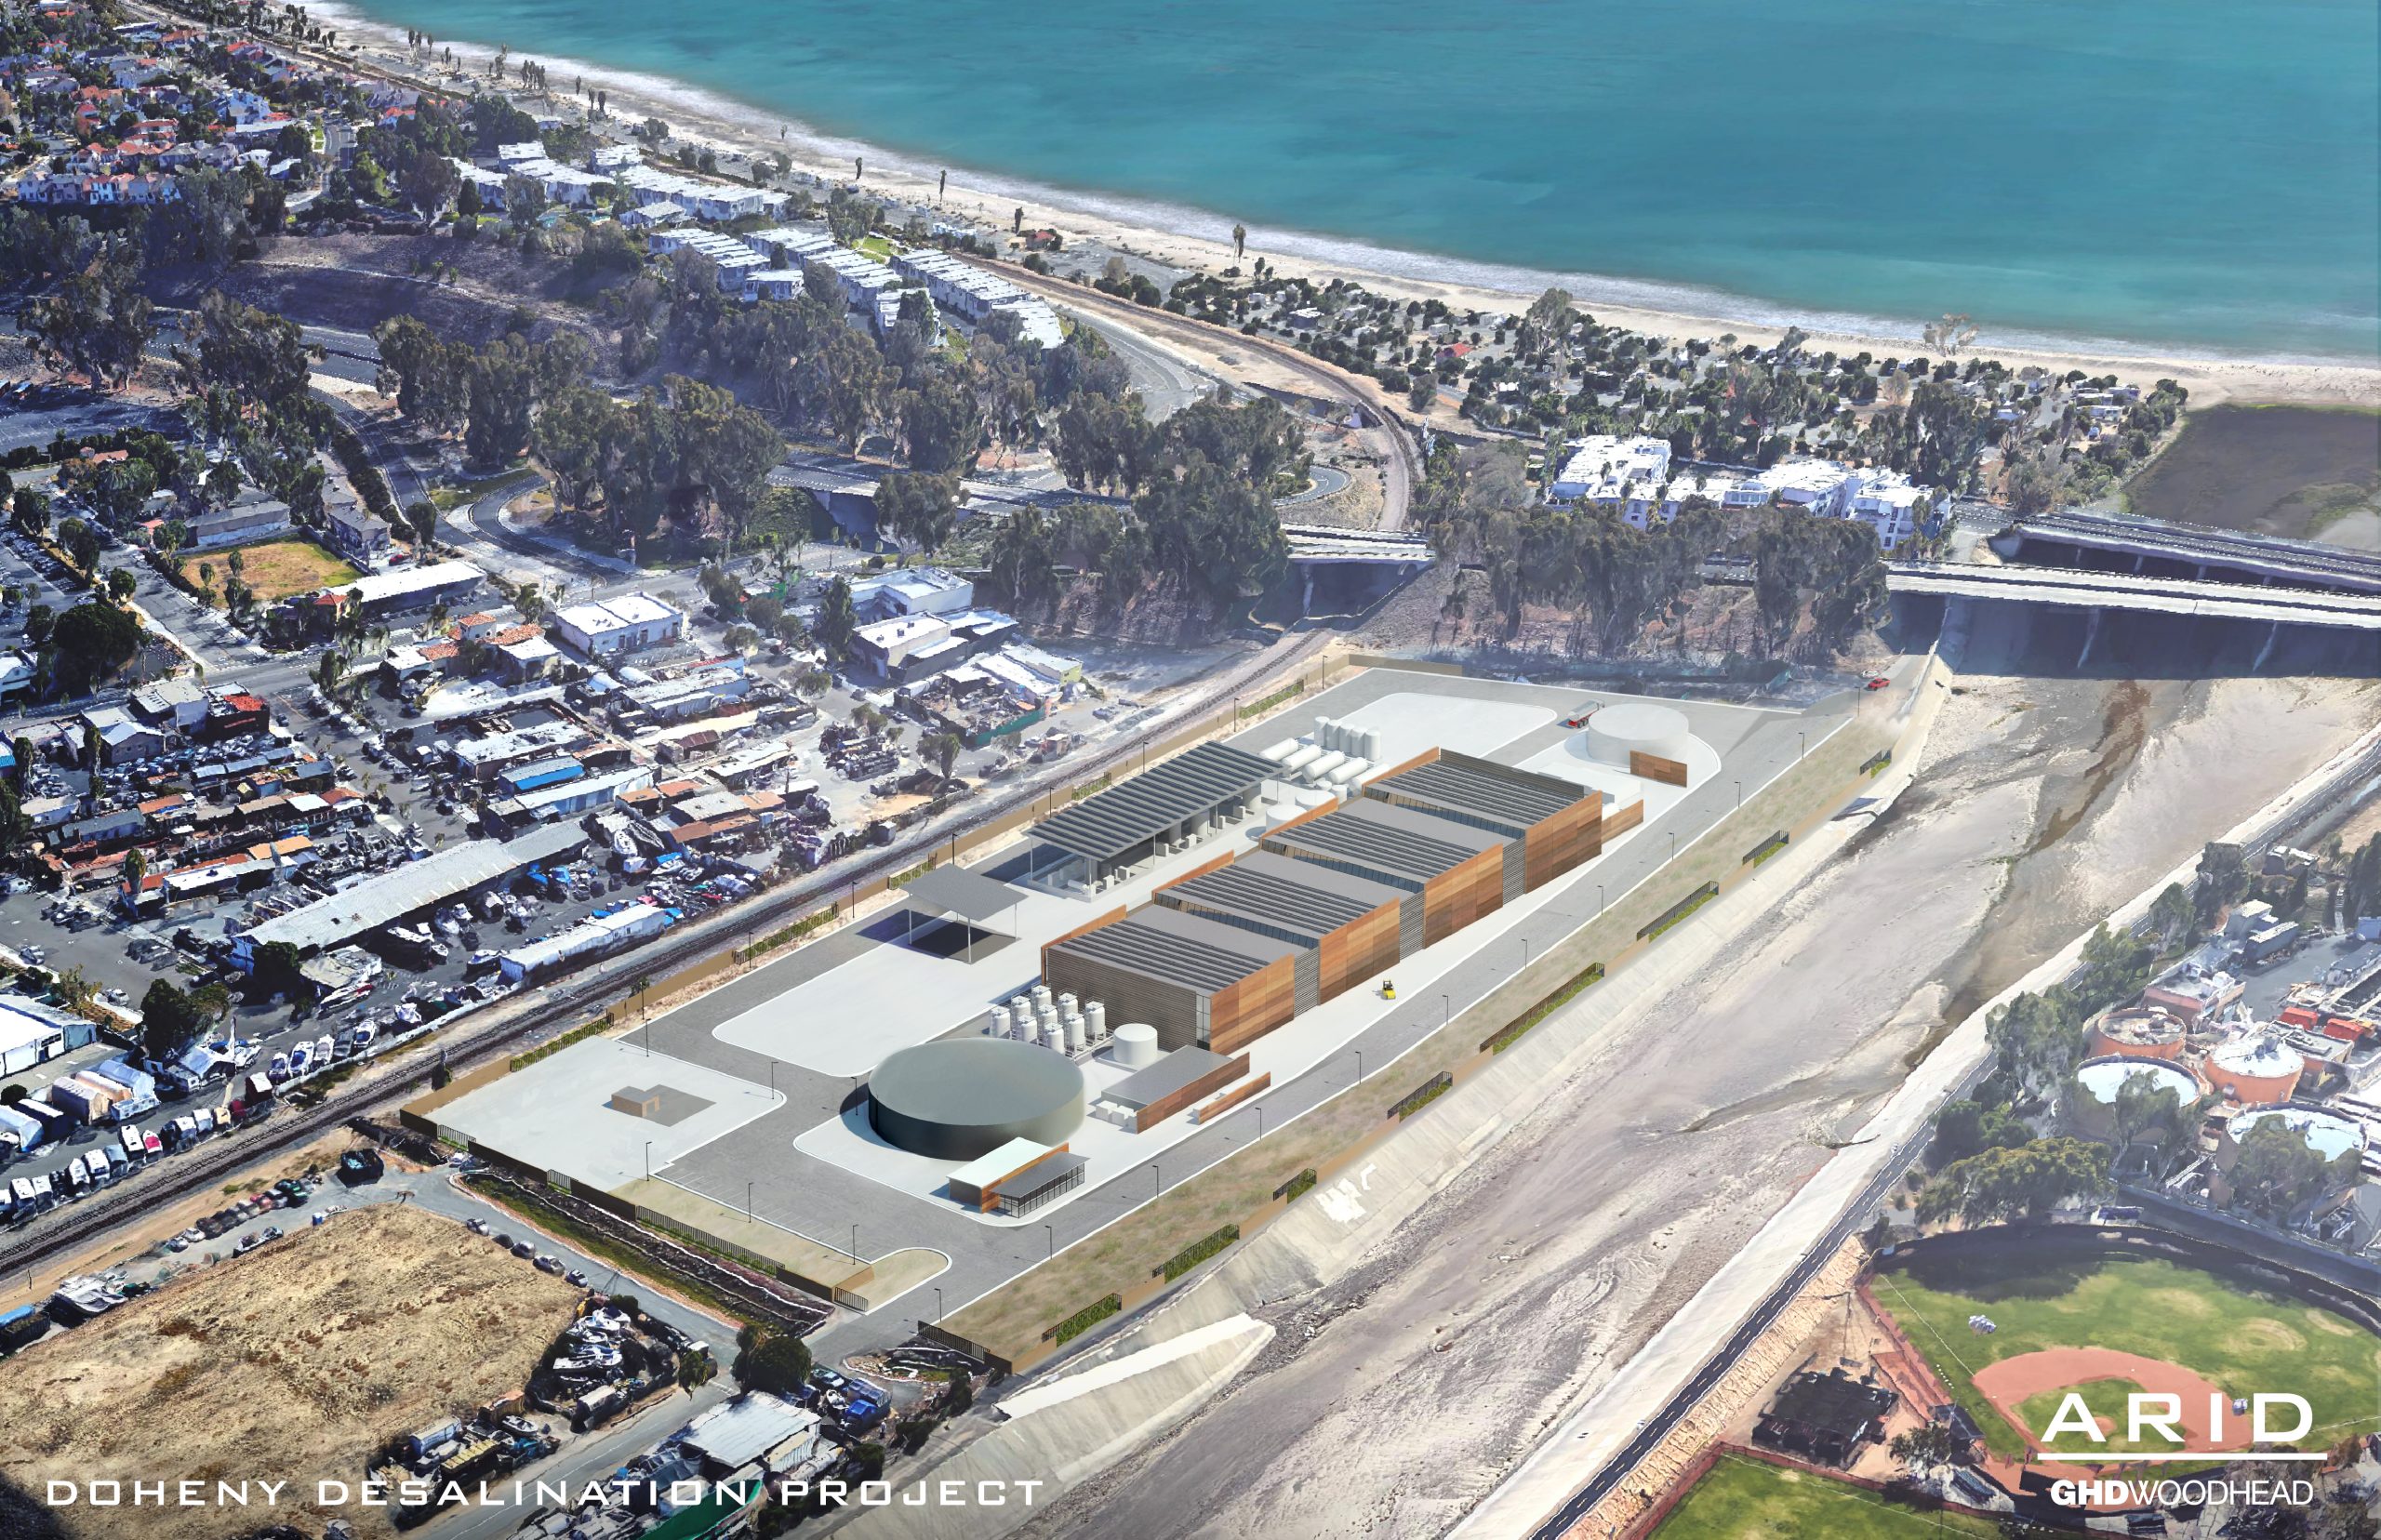 Coffee Chat to Discuss Doheny Desalination Plant | Dana Point TimesOctober 21